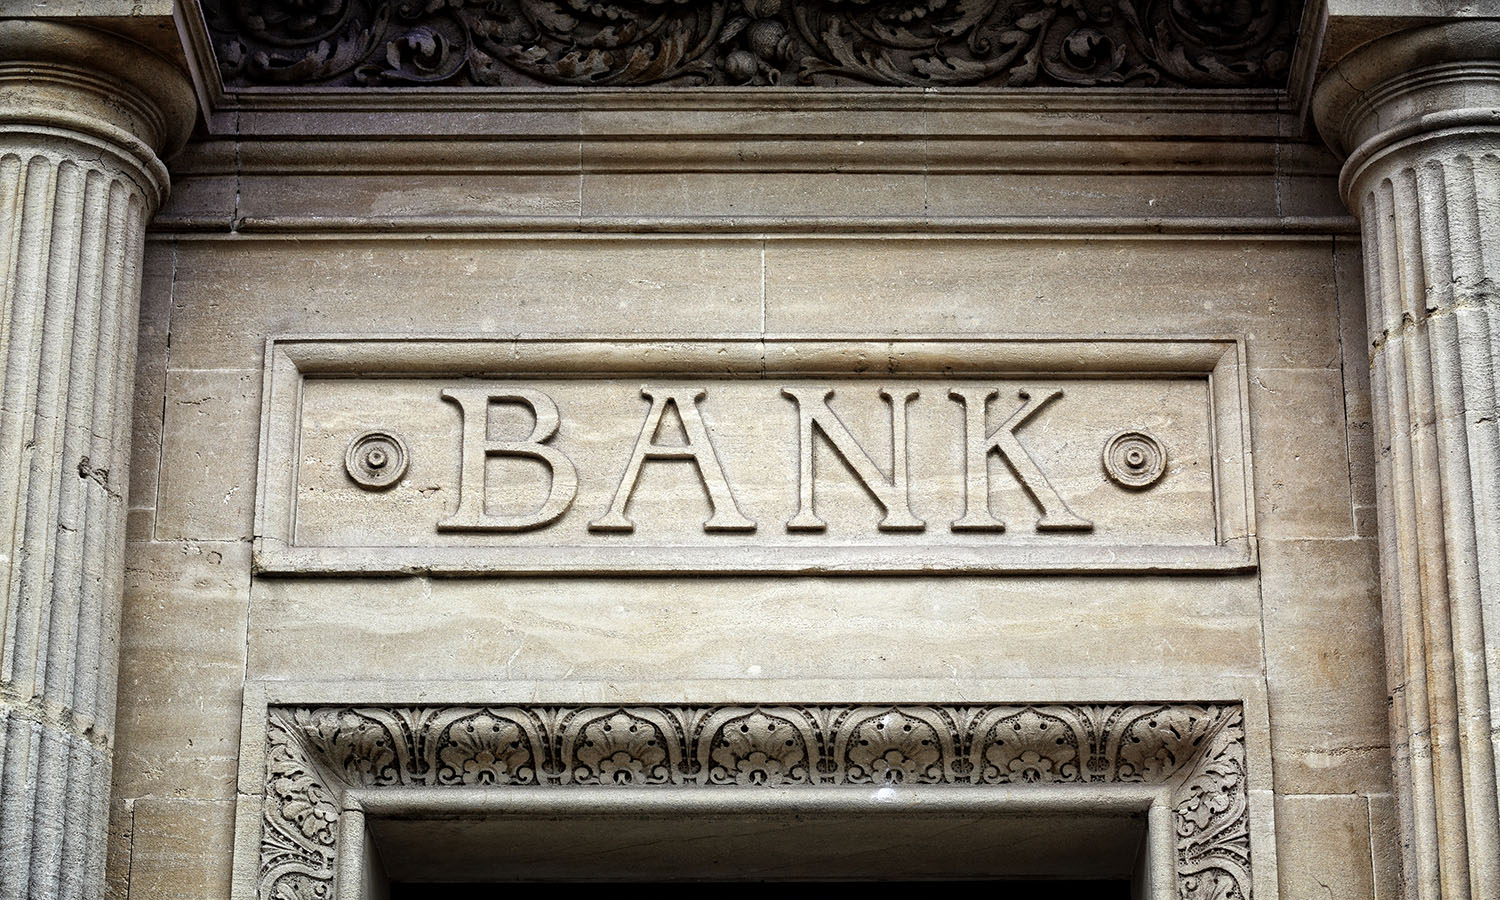 Bulding with the "Bank" sign